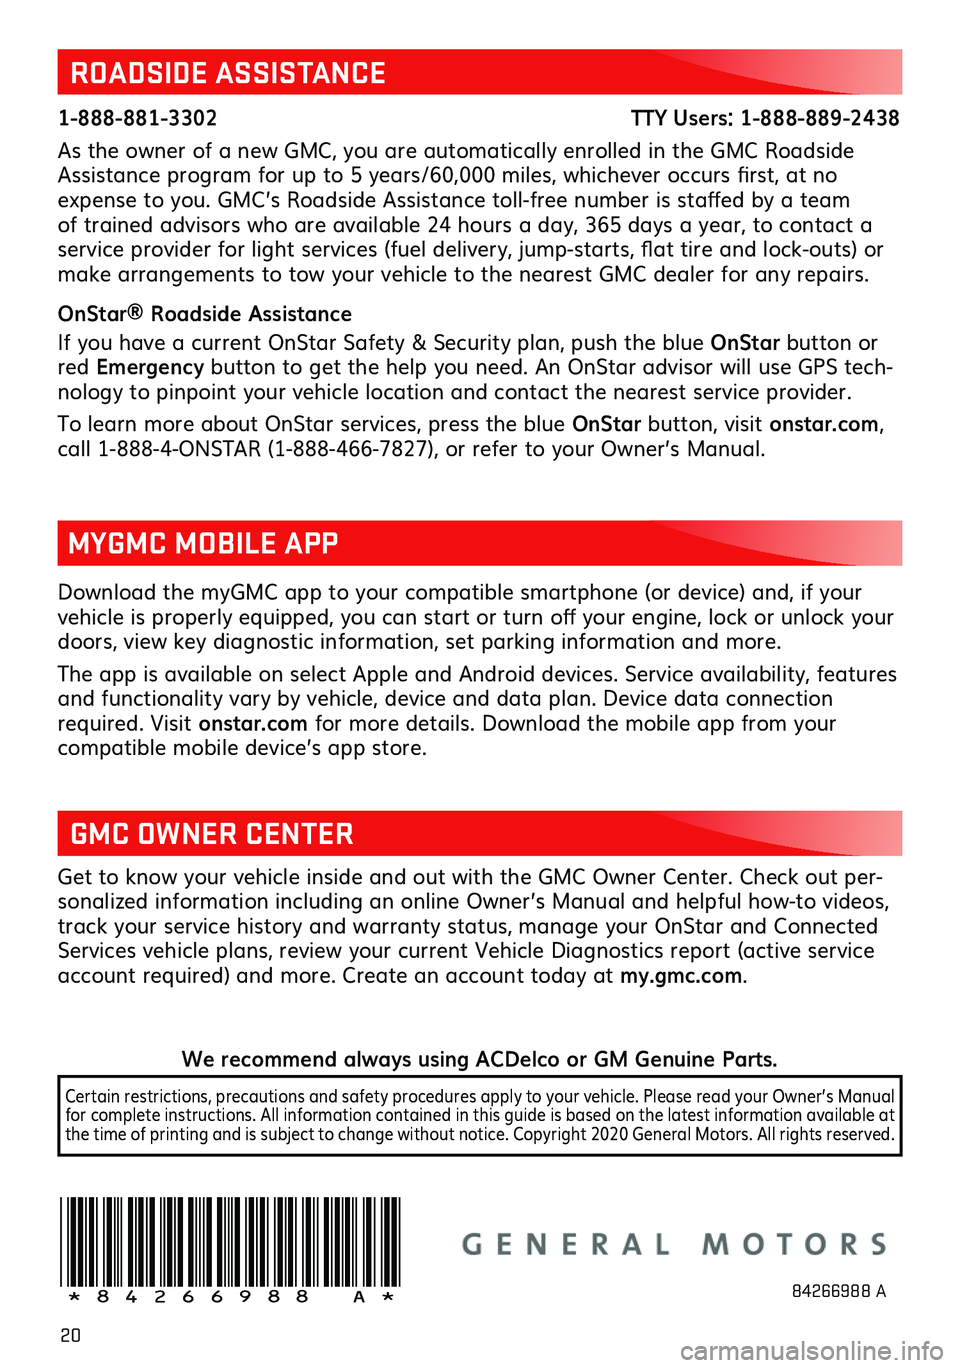 GMC YUKON 2021  Get To Know Guide 20
Download the myGMC app to your compatible smartphone (or device) and, if your vehicle is properly equipped, you can start or turn off your engine, lock or unlock your doors, view key diagnostic inf